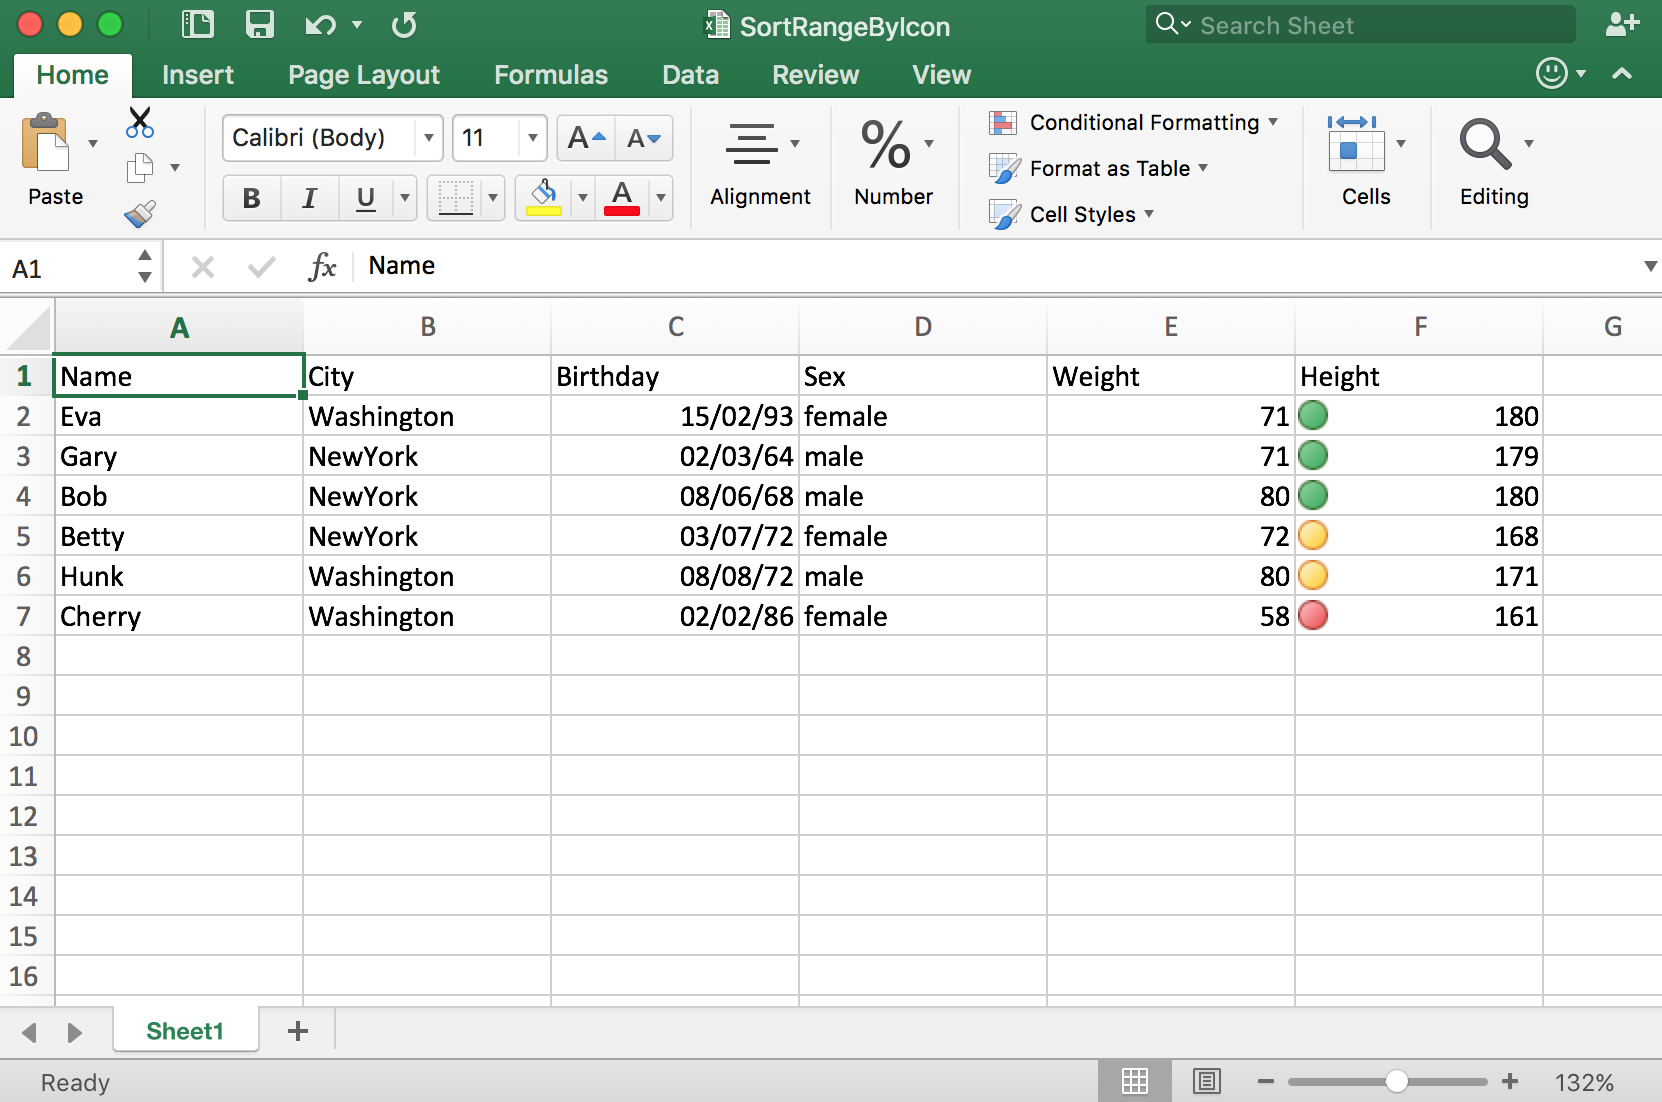 Sort data with your spreadsheet API